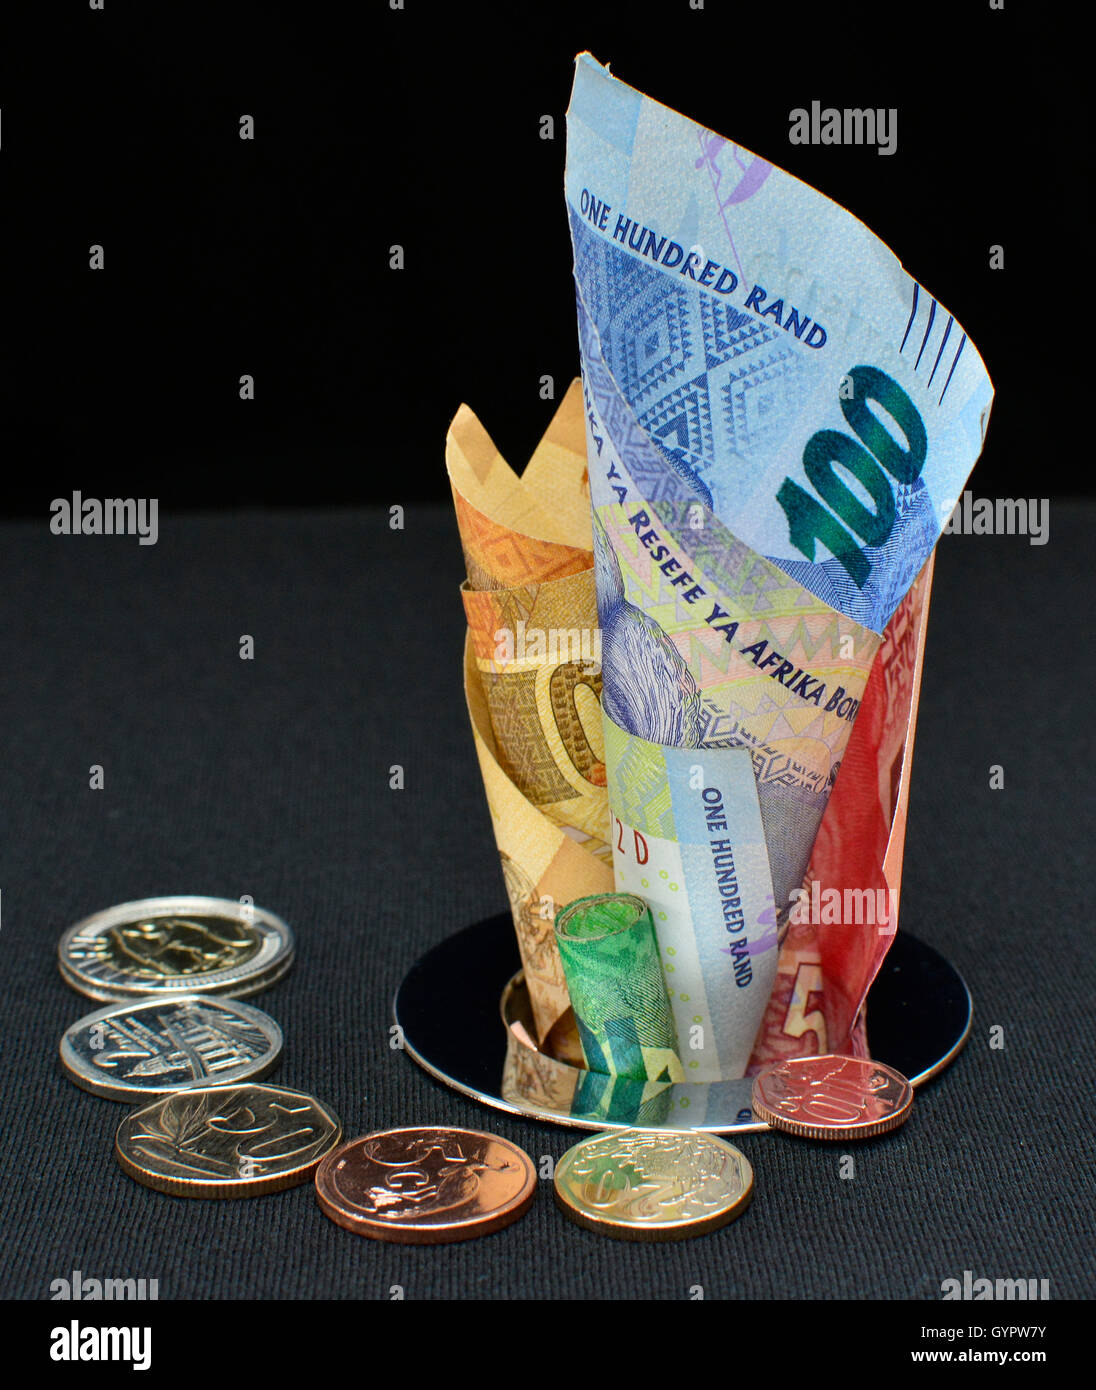 Money down the drain concept. Money lost. Money spent unwisely. Wasteful expenditure. Bad investment. Side view. Stock Photo